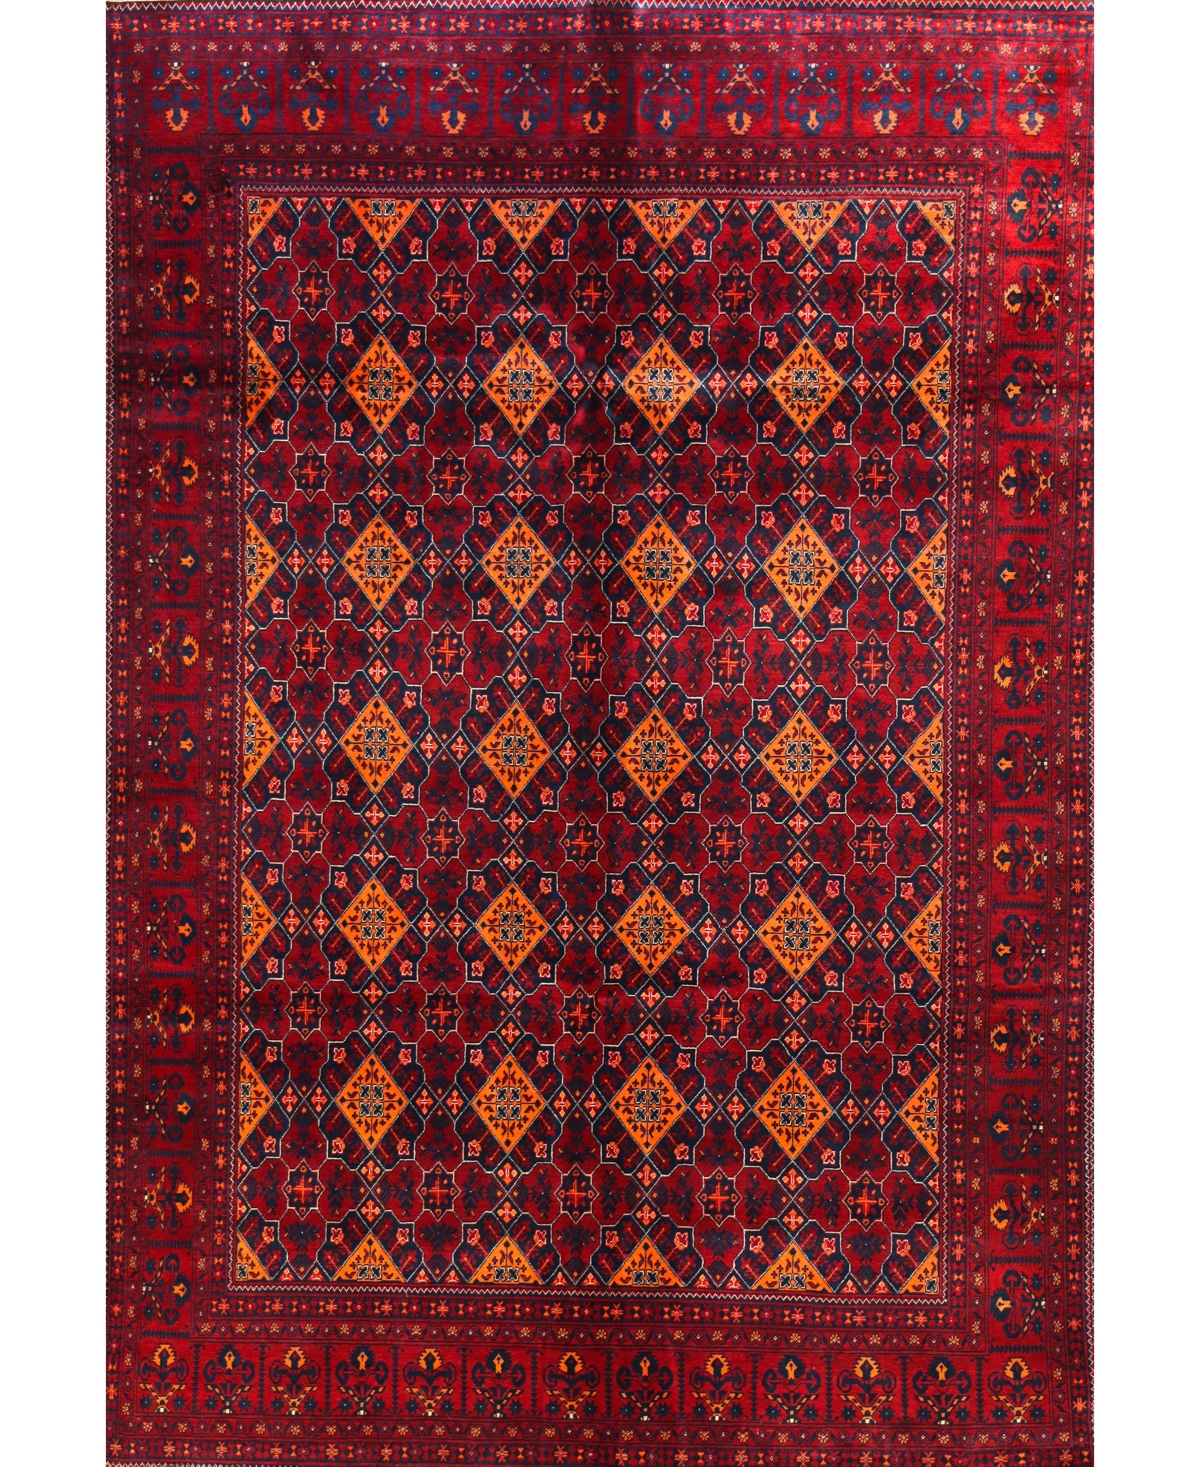 Bb Rugs One Of A Kind Fine Beshir 6'6" X 9'7" Area Rug In Red